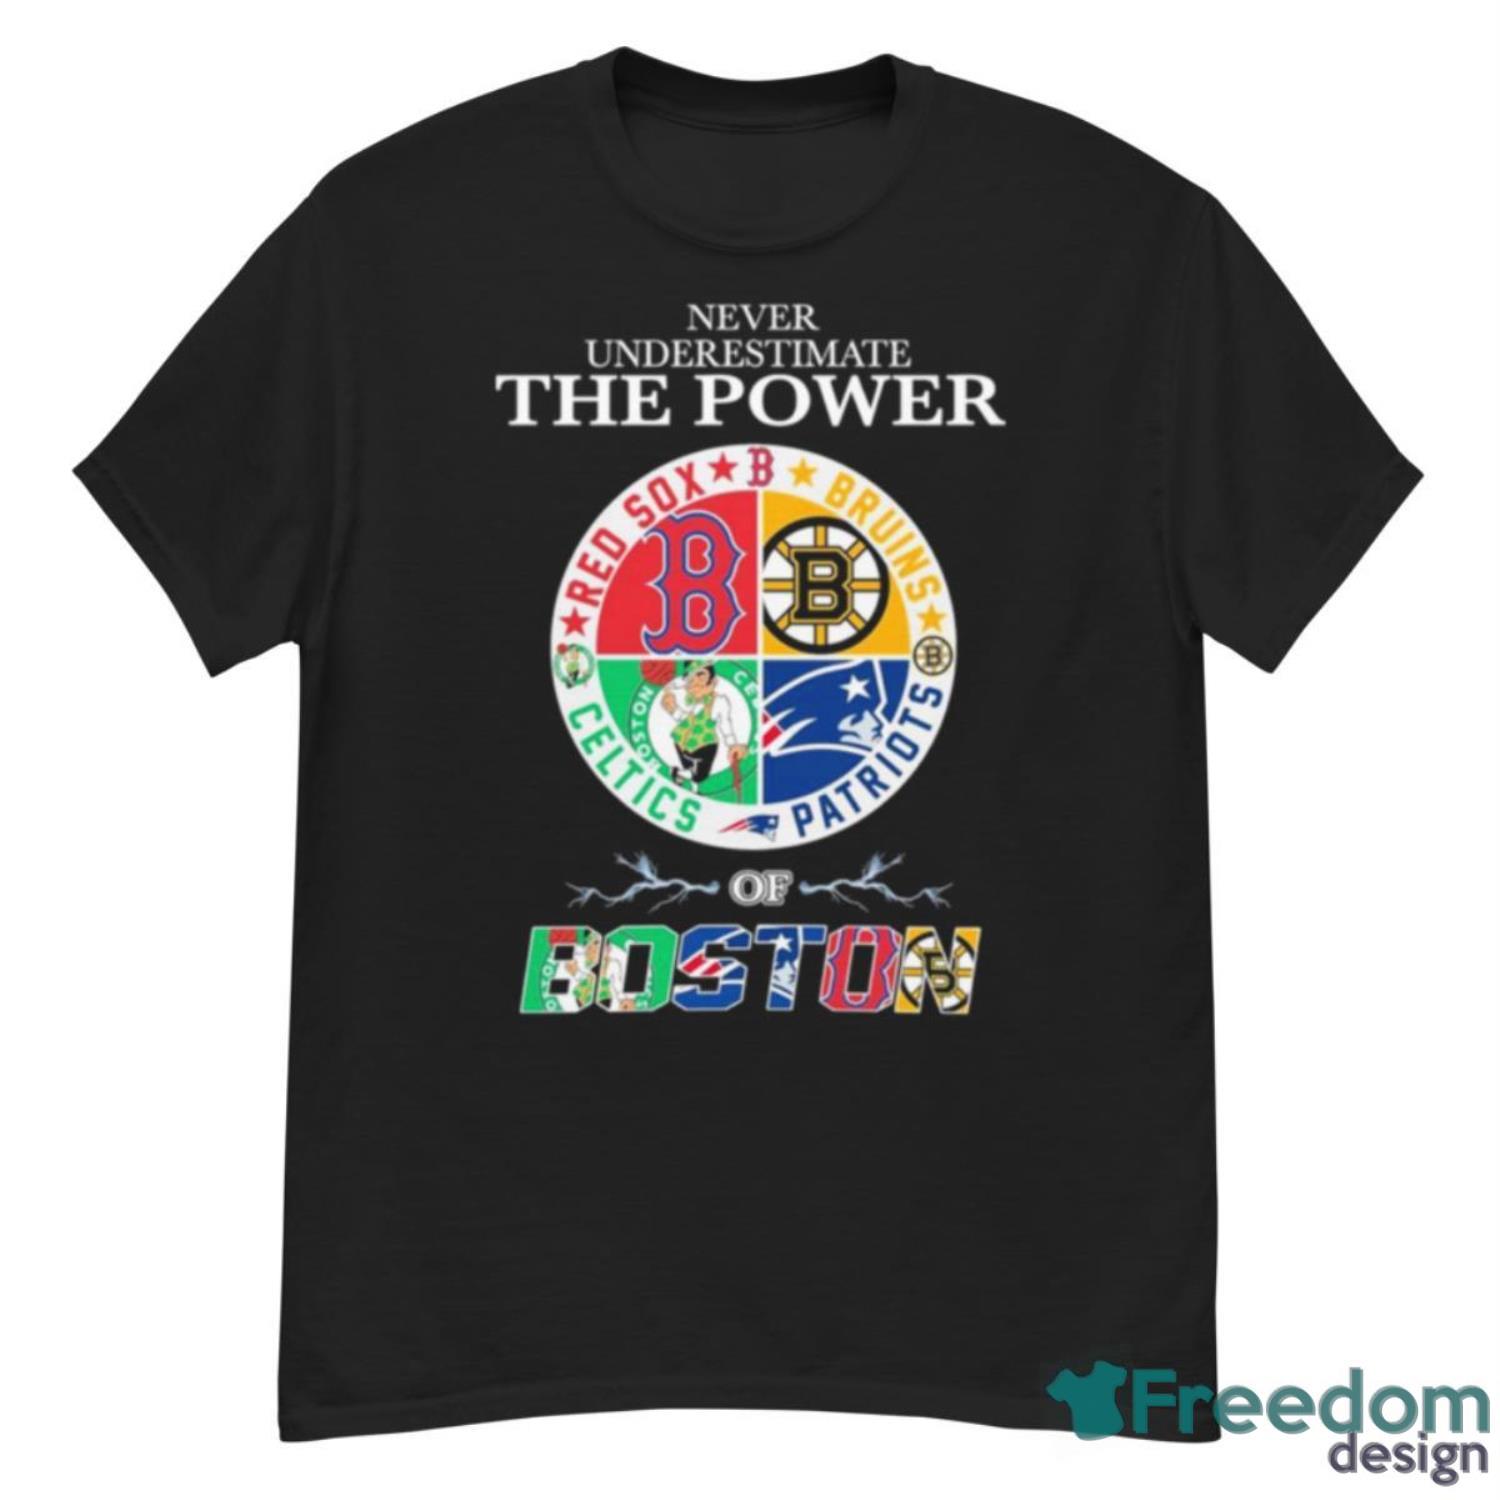 Red Sox Bruins Patriots And Celtics Never Underestimate The Power Of Boston  Shirt - Freedomdesign